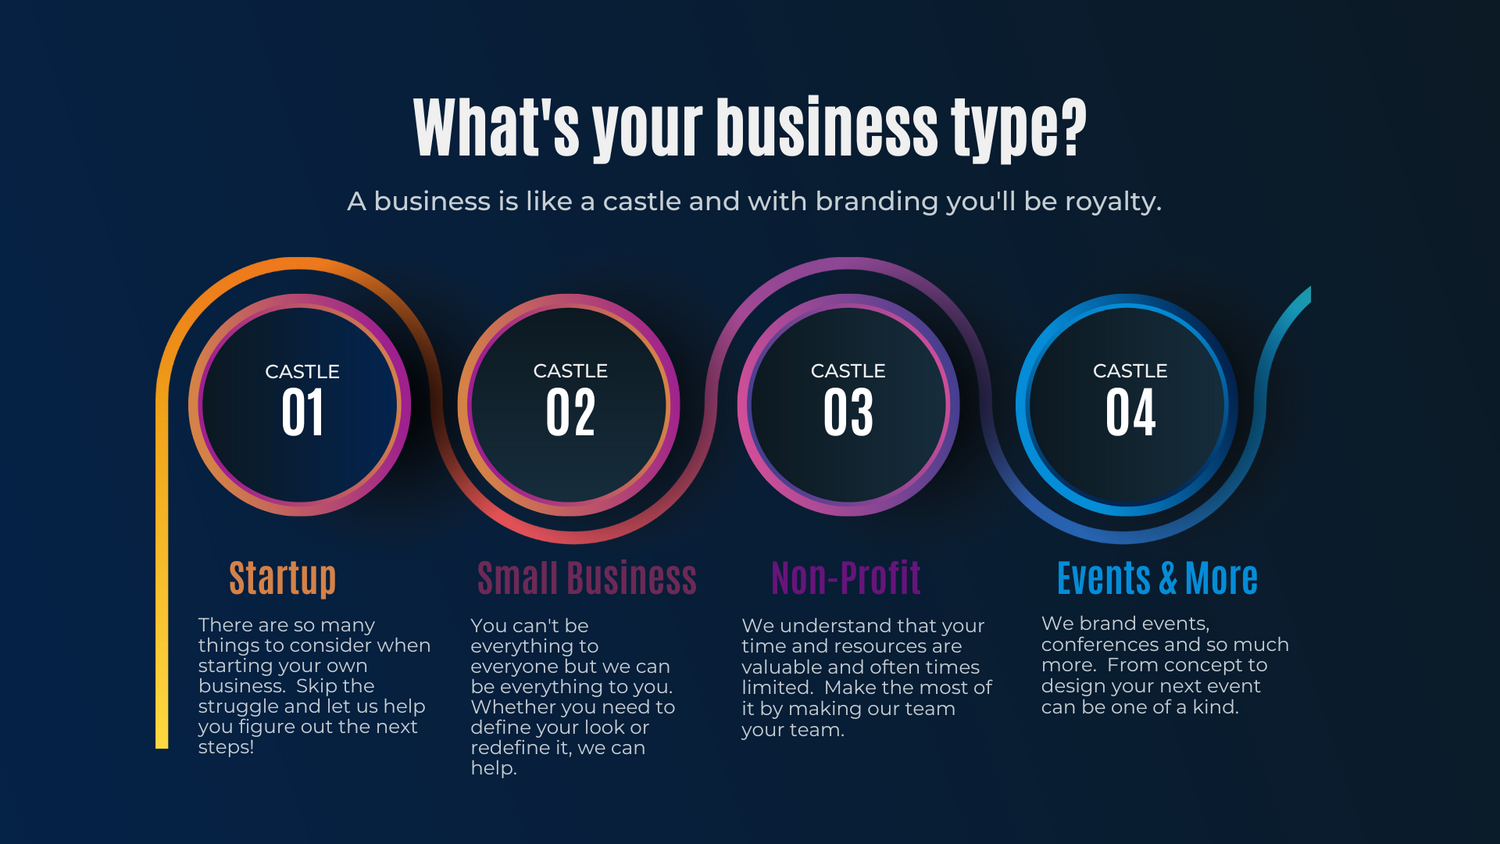 Review of business types and services provided.